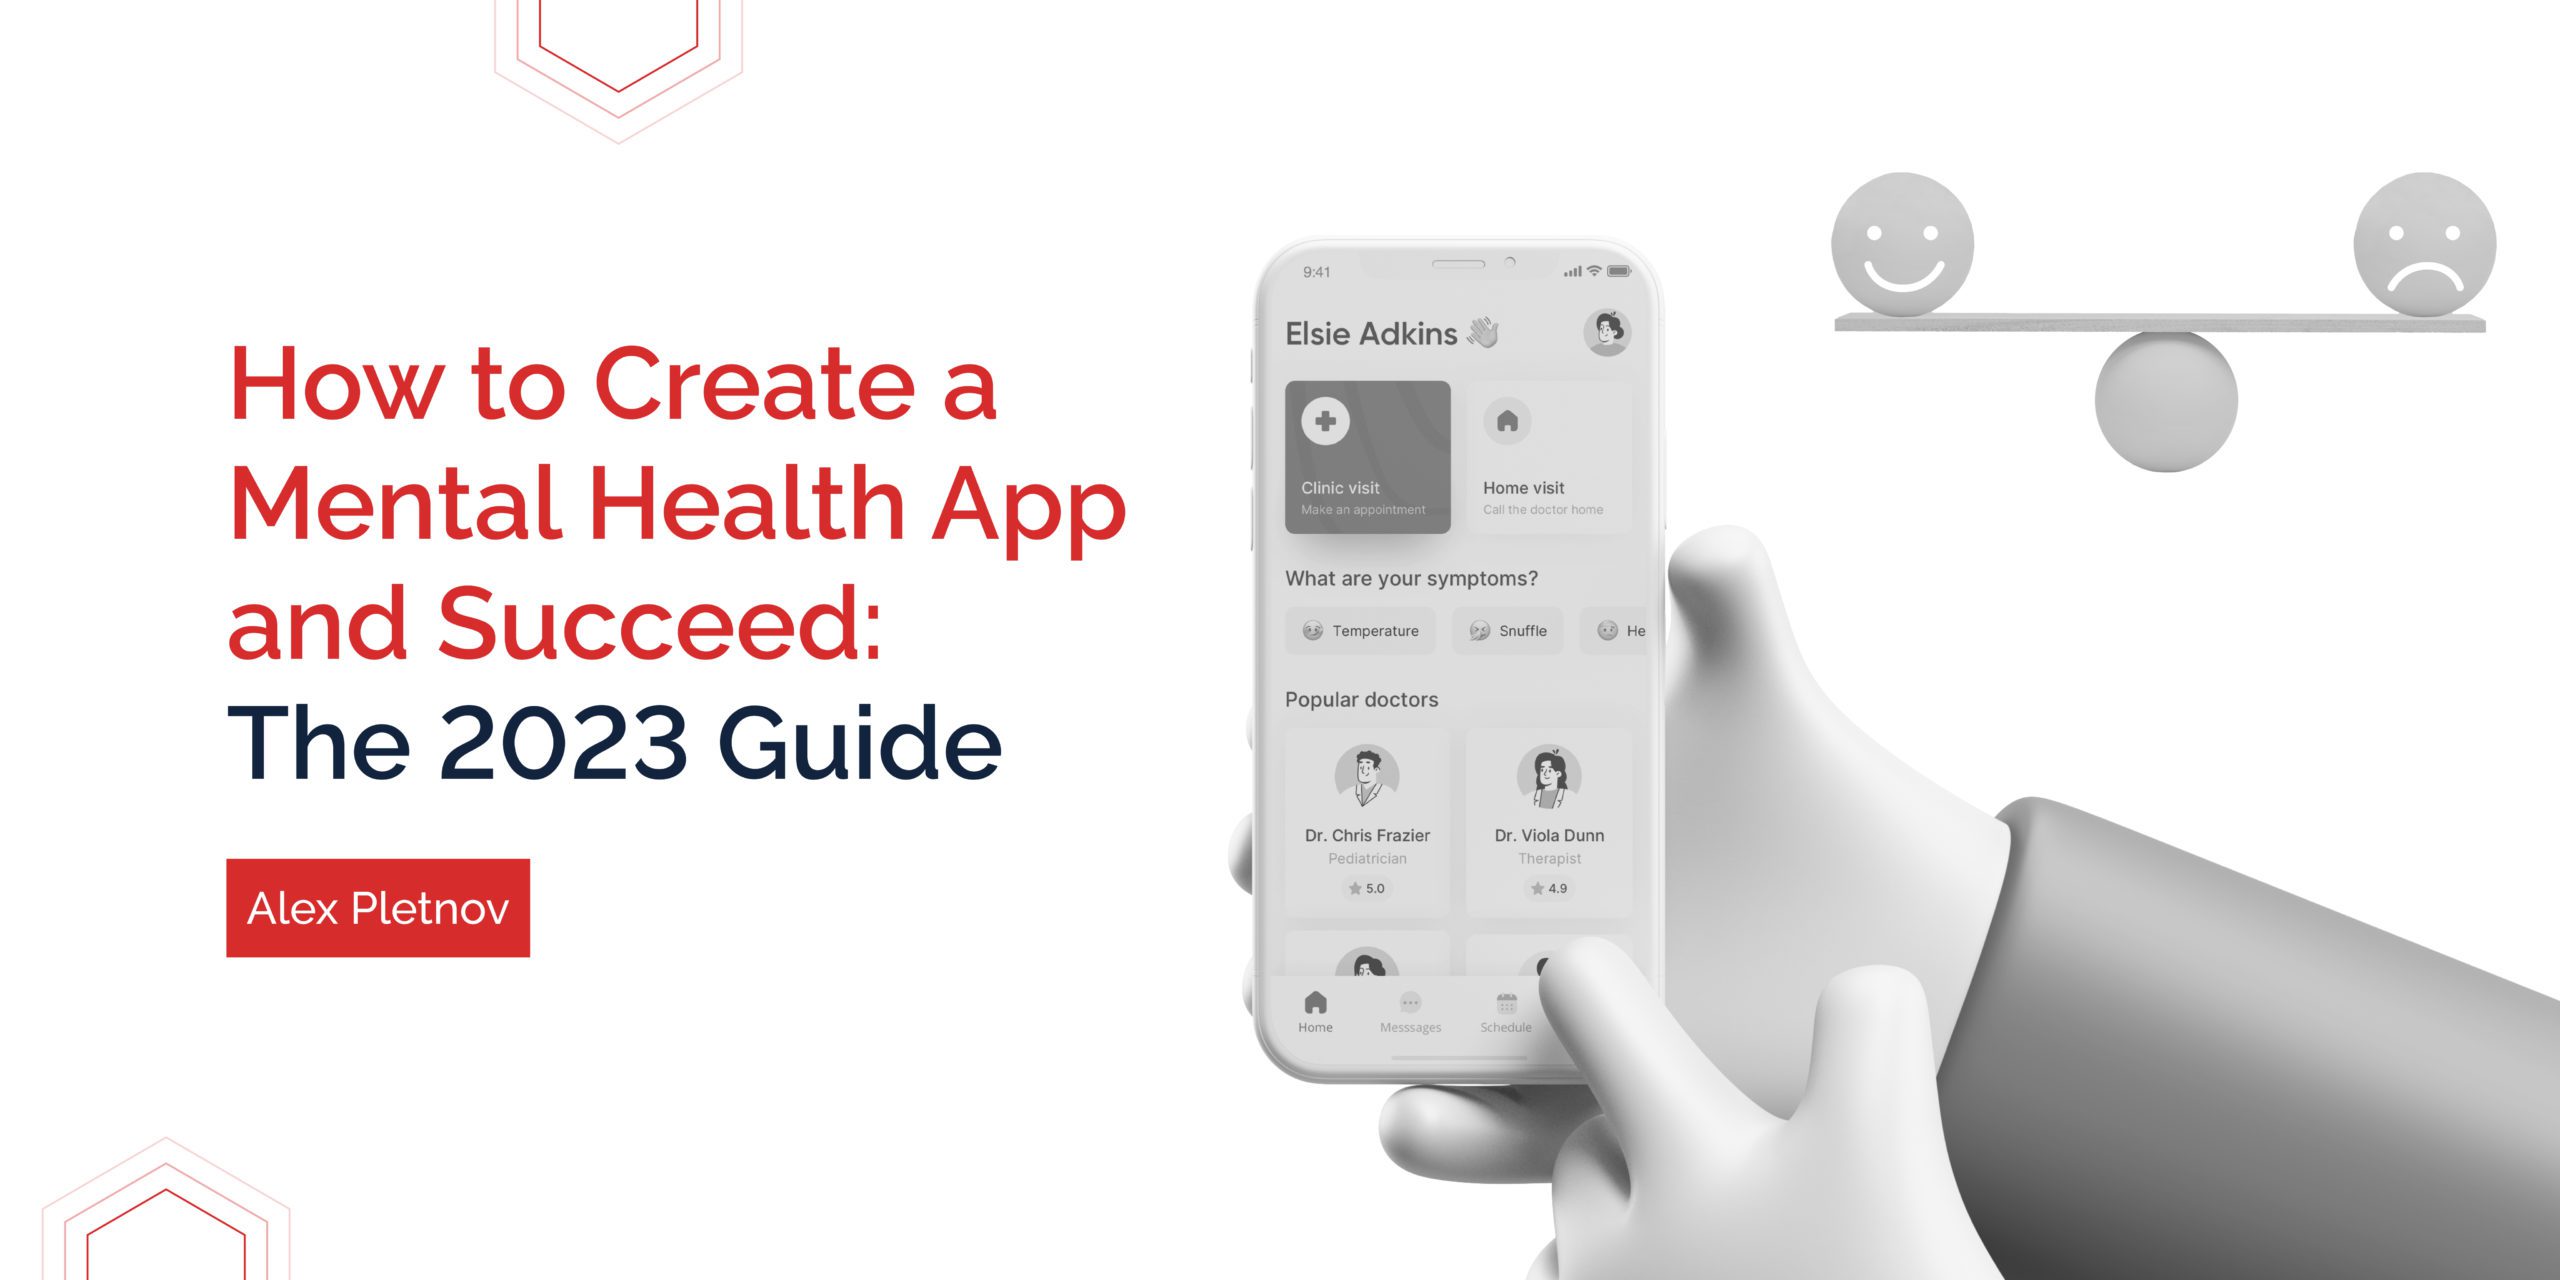 How to Create a Mental Health App and Succeed